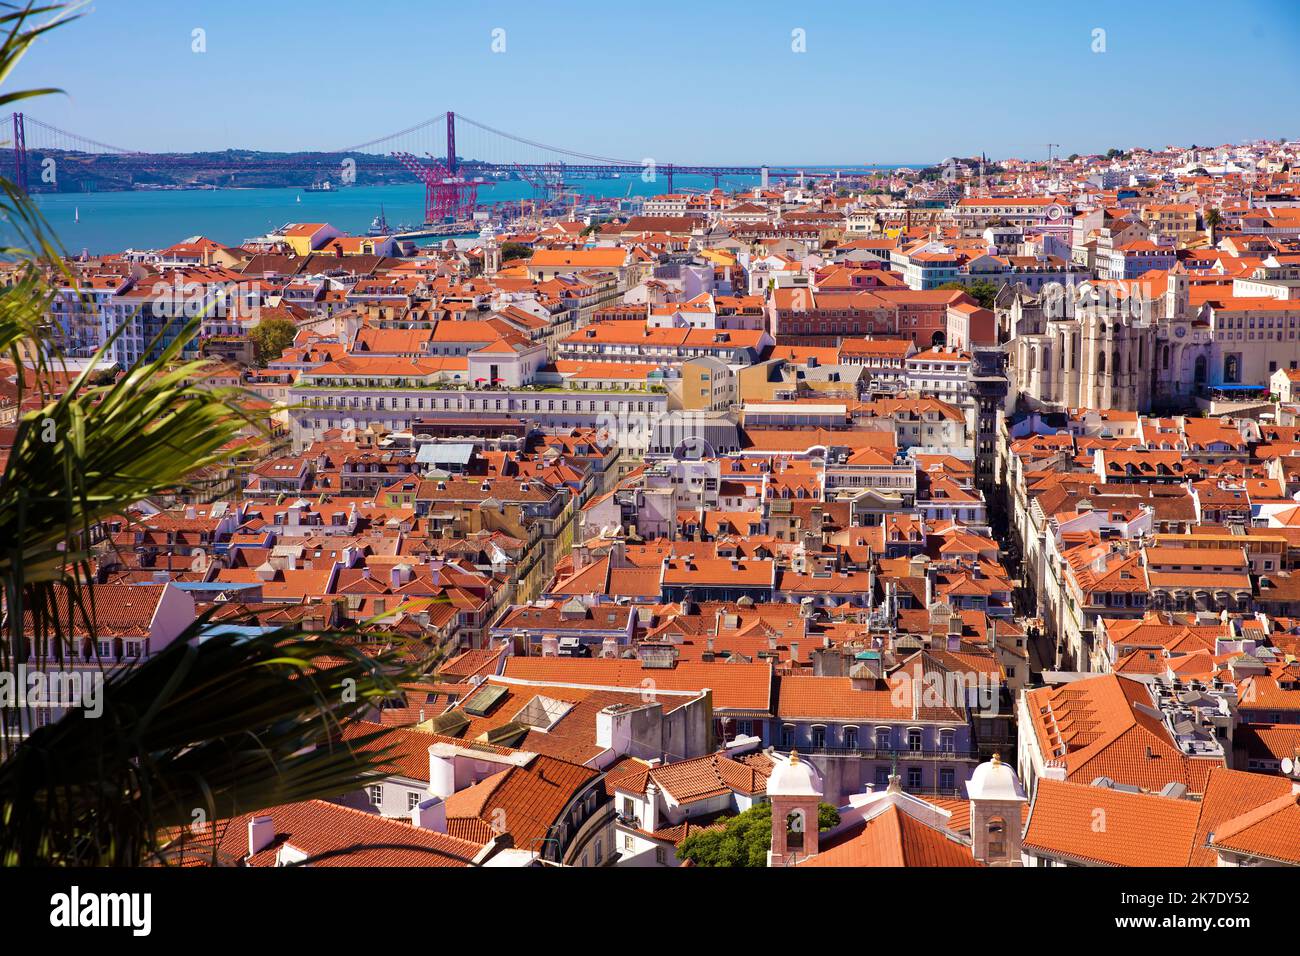 Lisbon, Portugal rooftops, River Tagus and Ponte 25 de Abril suspension bridge in panoramic view from Castelo Sao Jorge Stock Photo